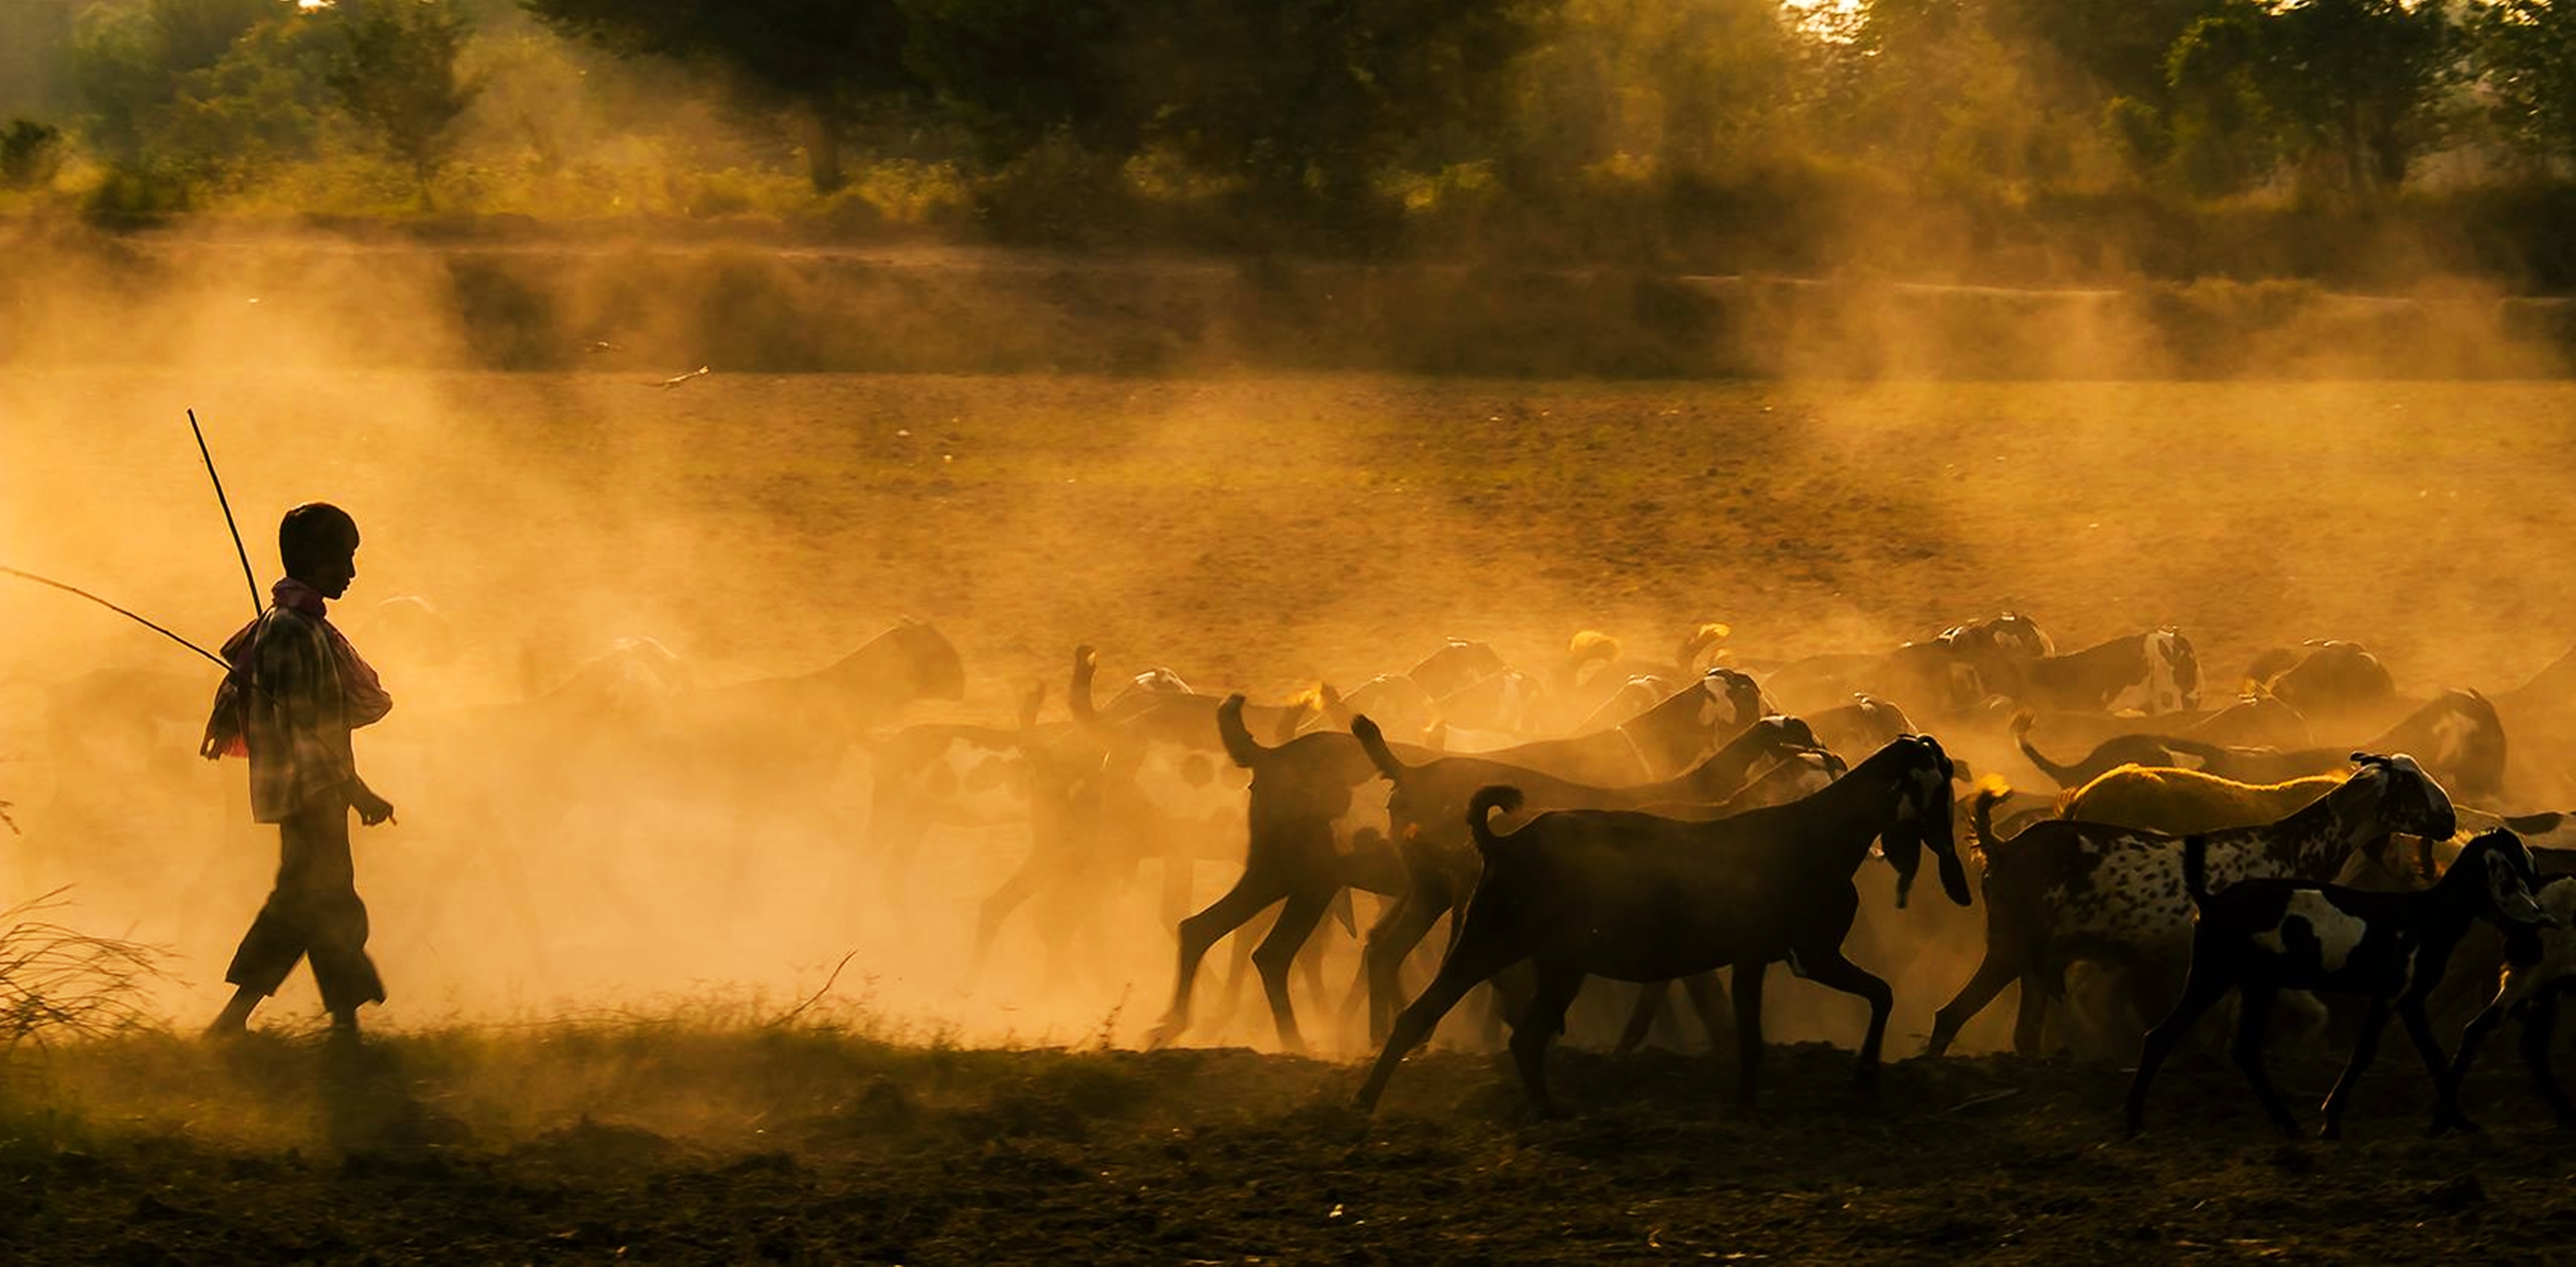 photography, landscape, countryside, dust, goat, nature